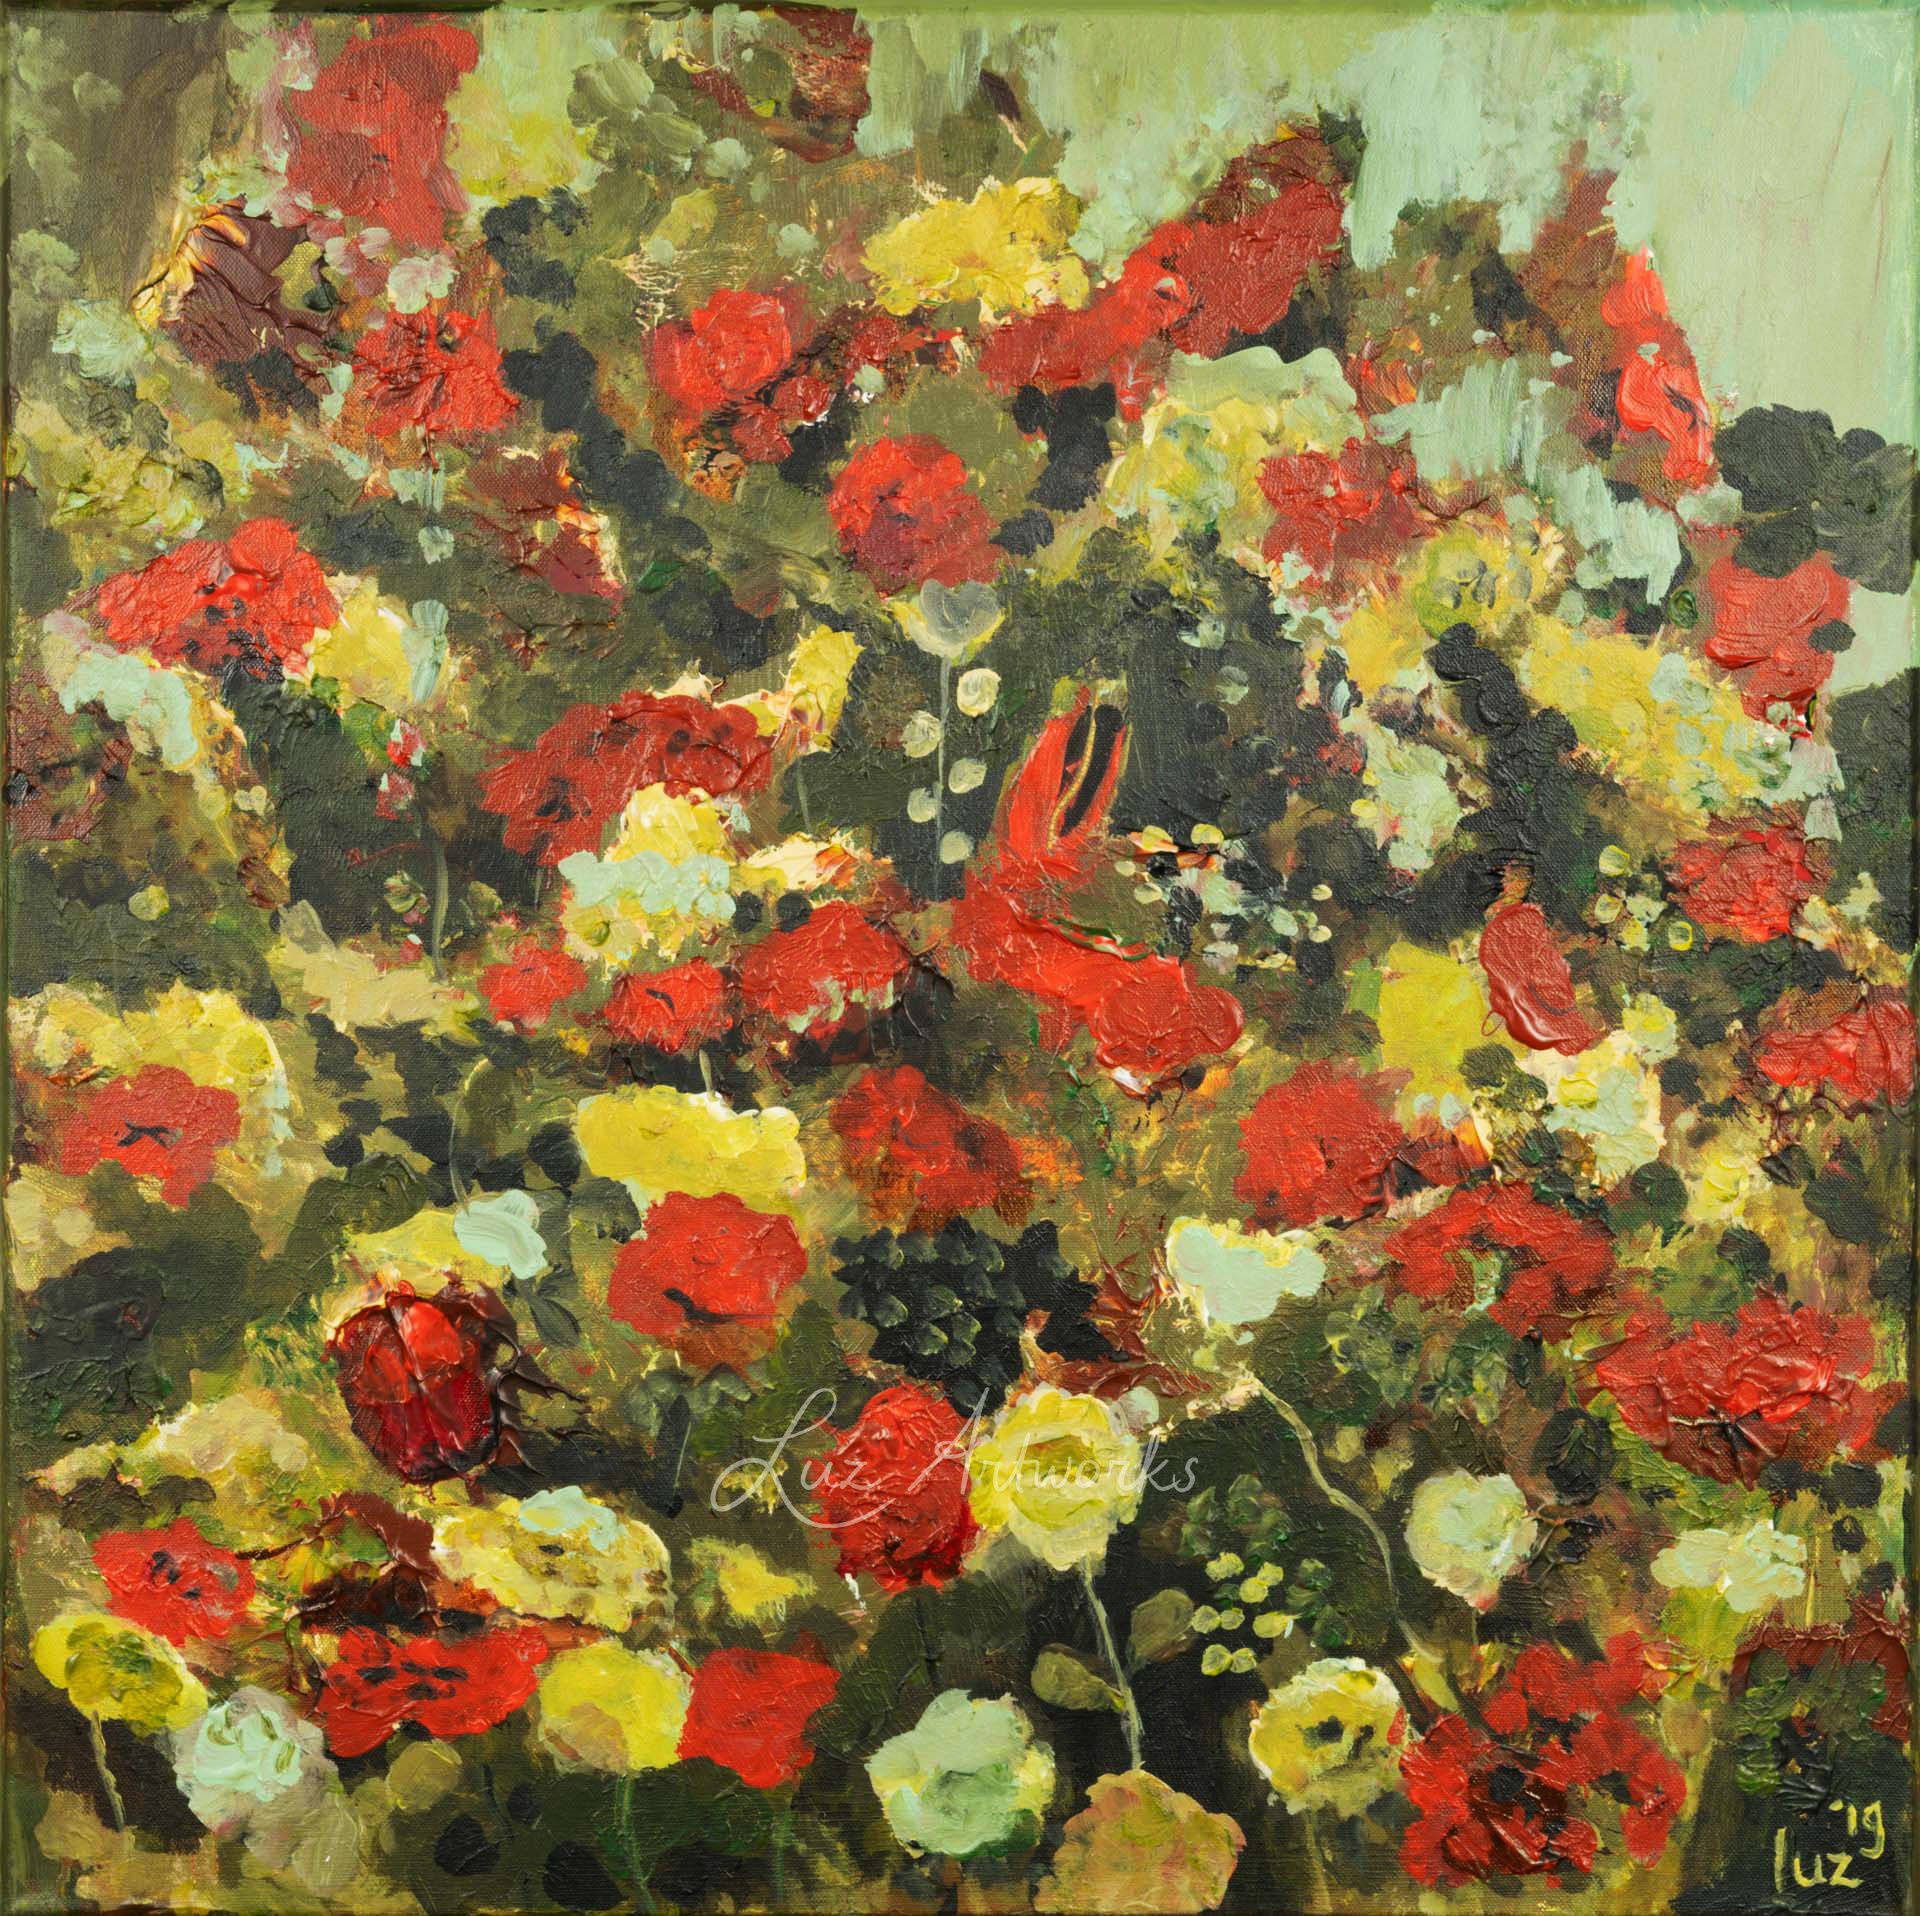 This image shows the painting 'Rose Garden' by Luz / Marloes Bloedjes.